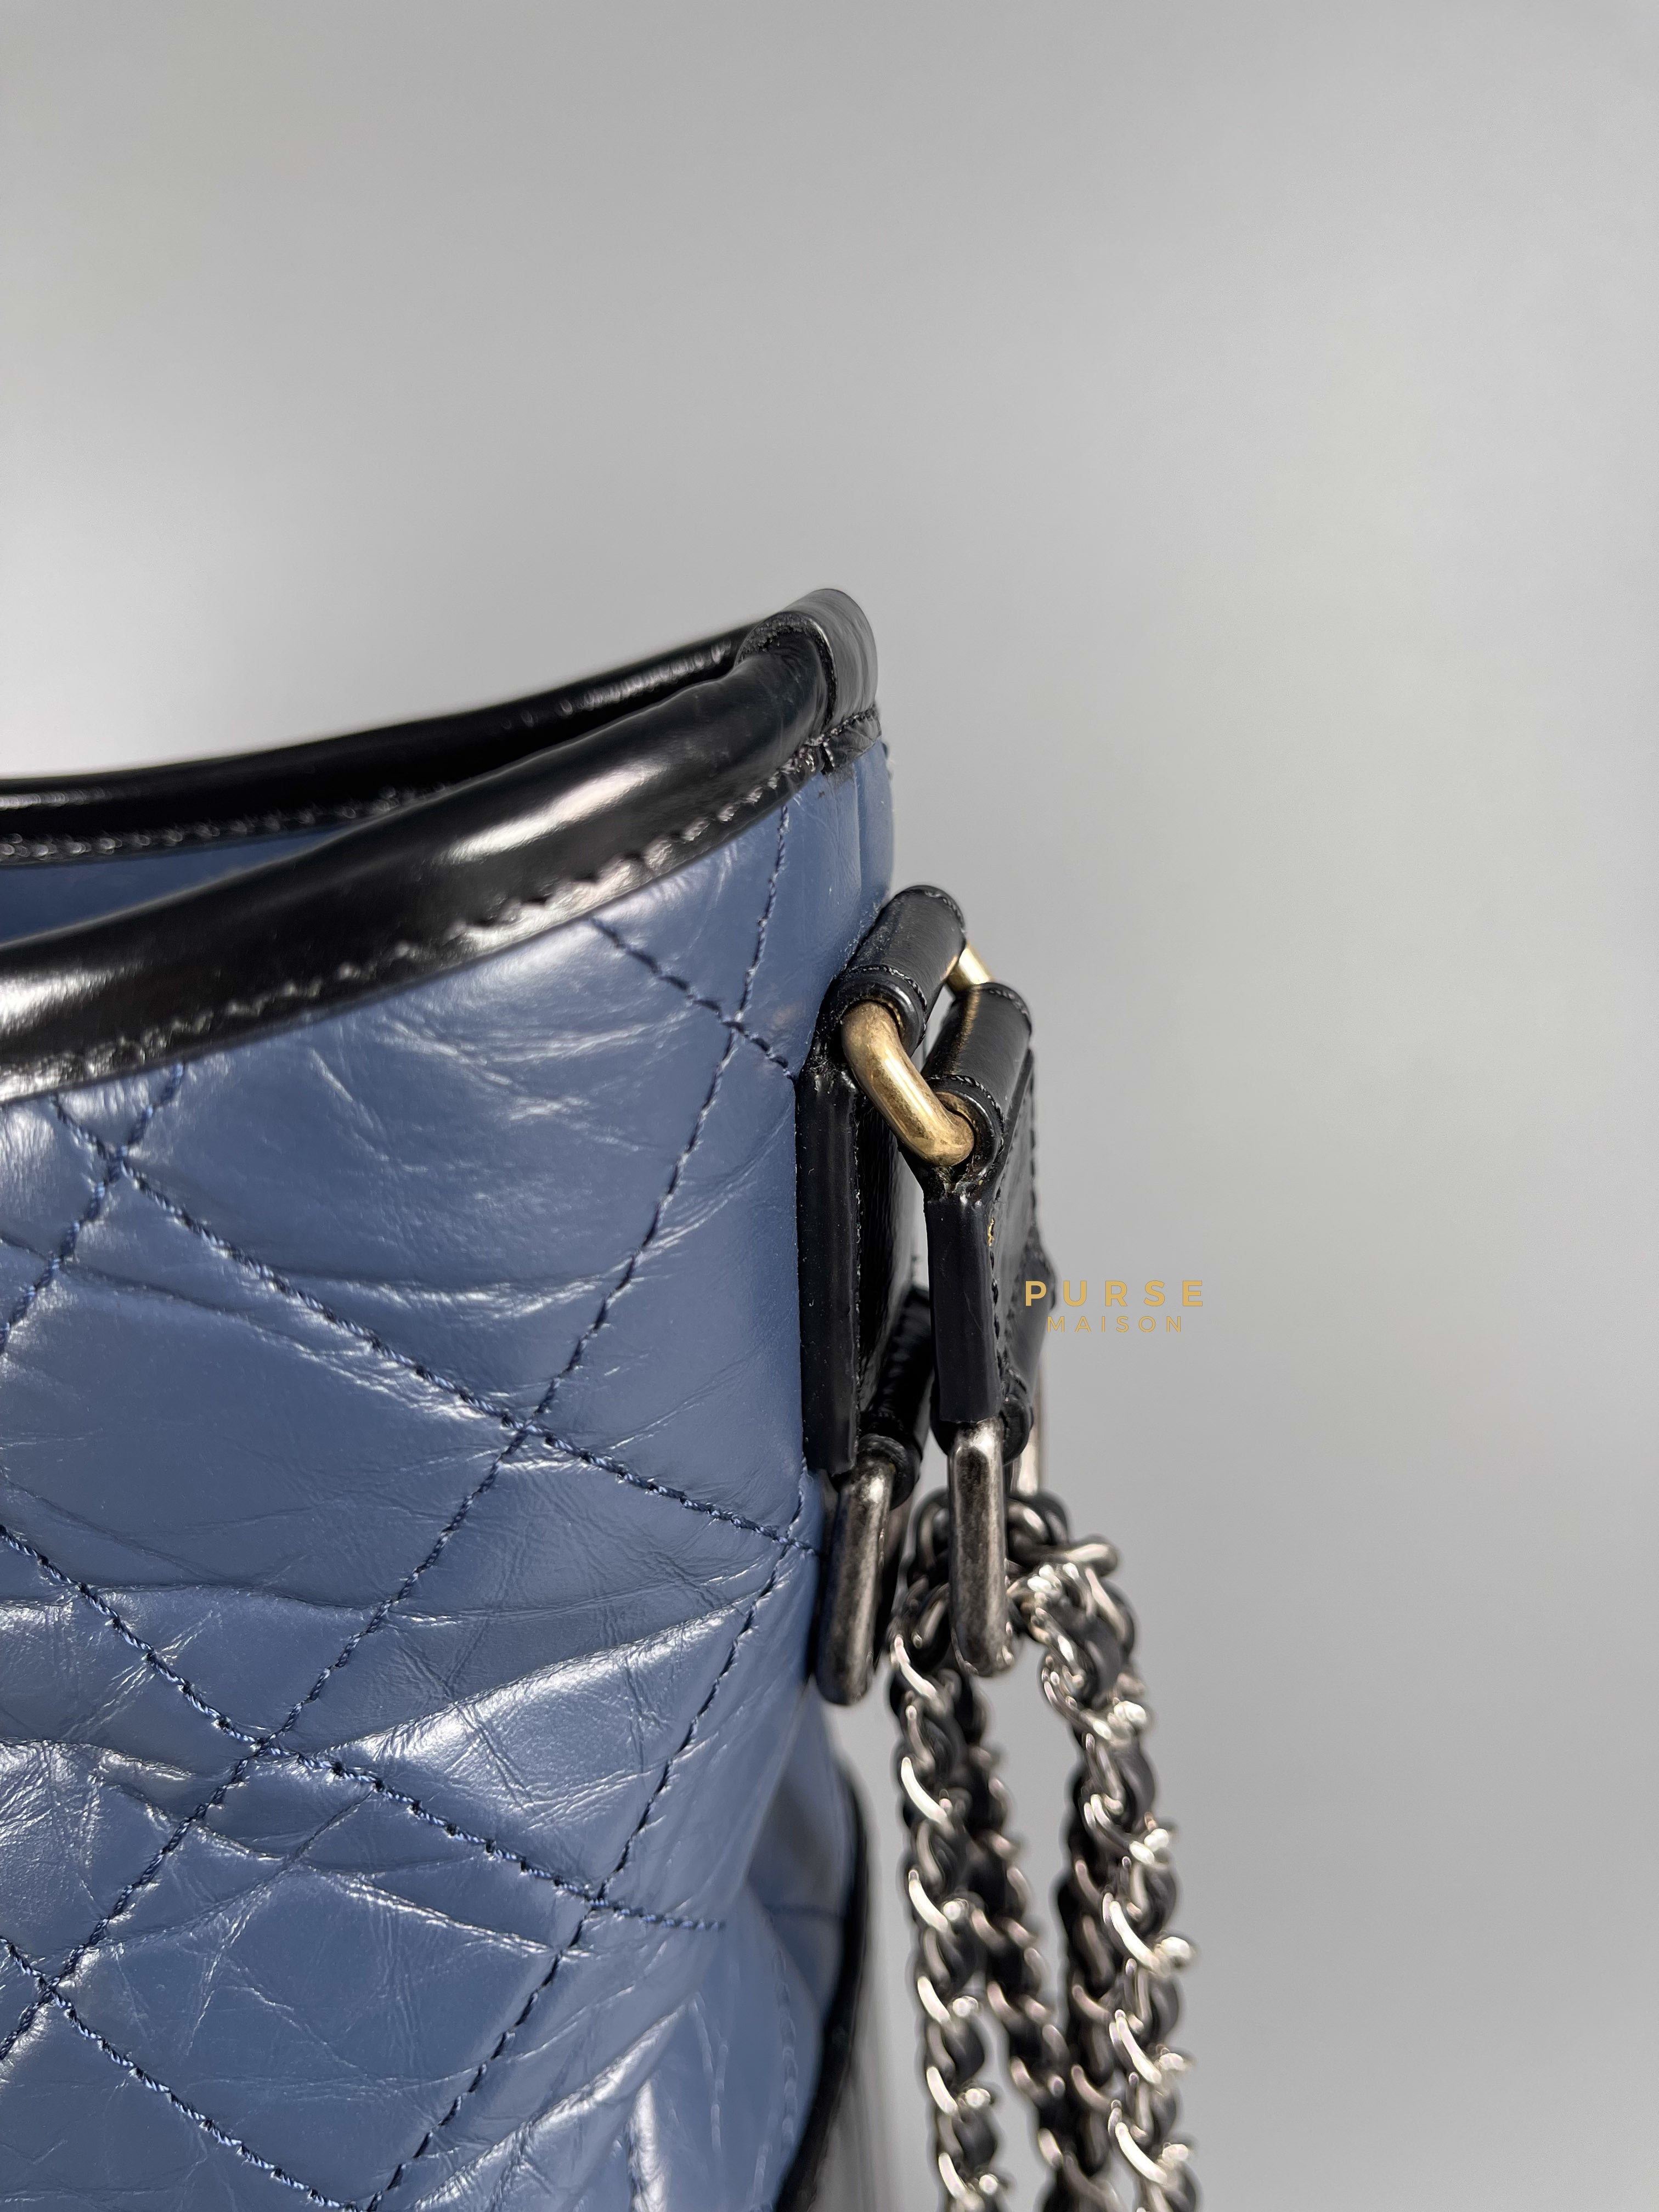 Chanel Gabrielle Old Medium Hobo Bag in Navy Blue Distressed Calfskin Leather & Mixed Hardware (Series 27) | Purse Maison Luxury Bags Shop